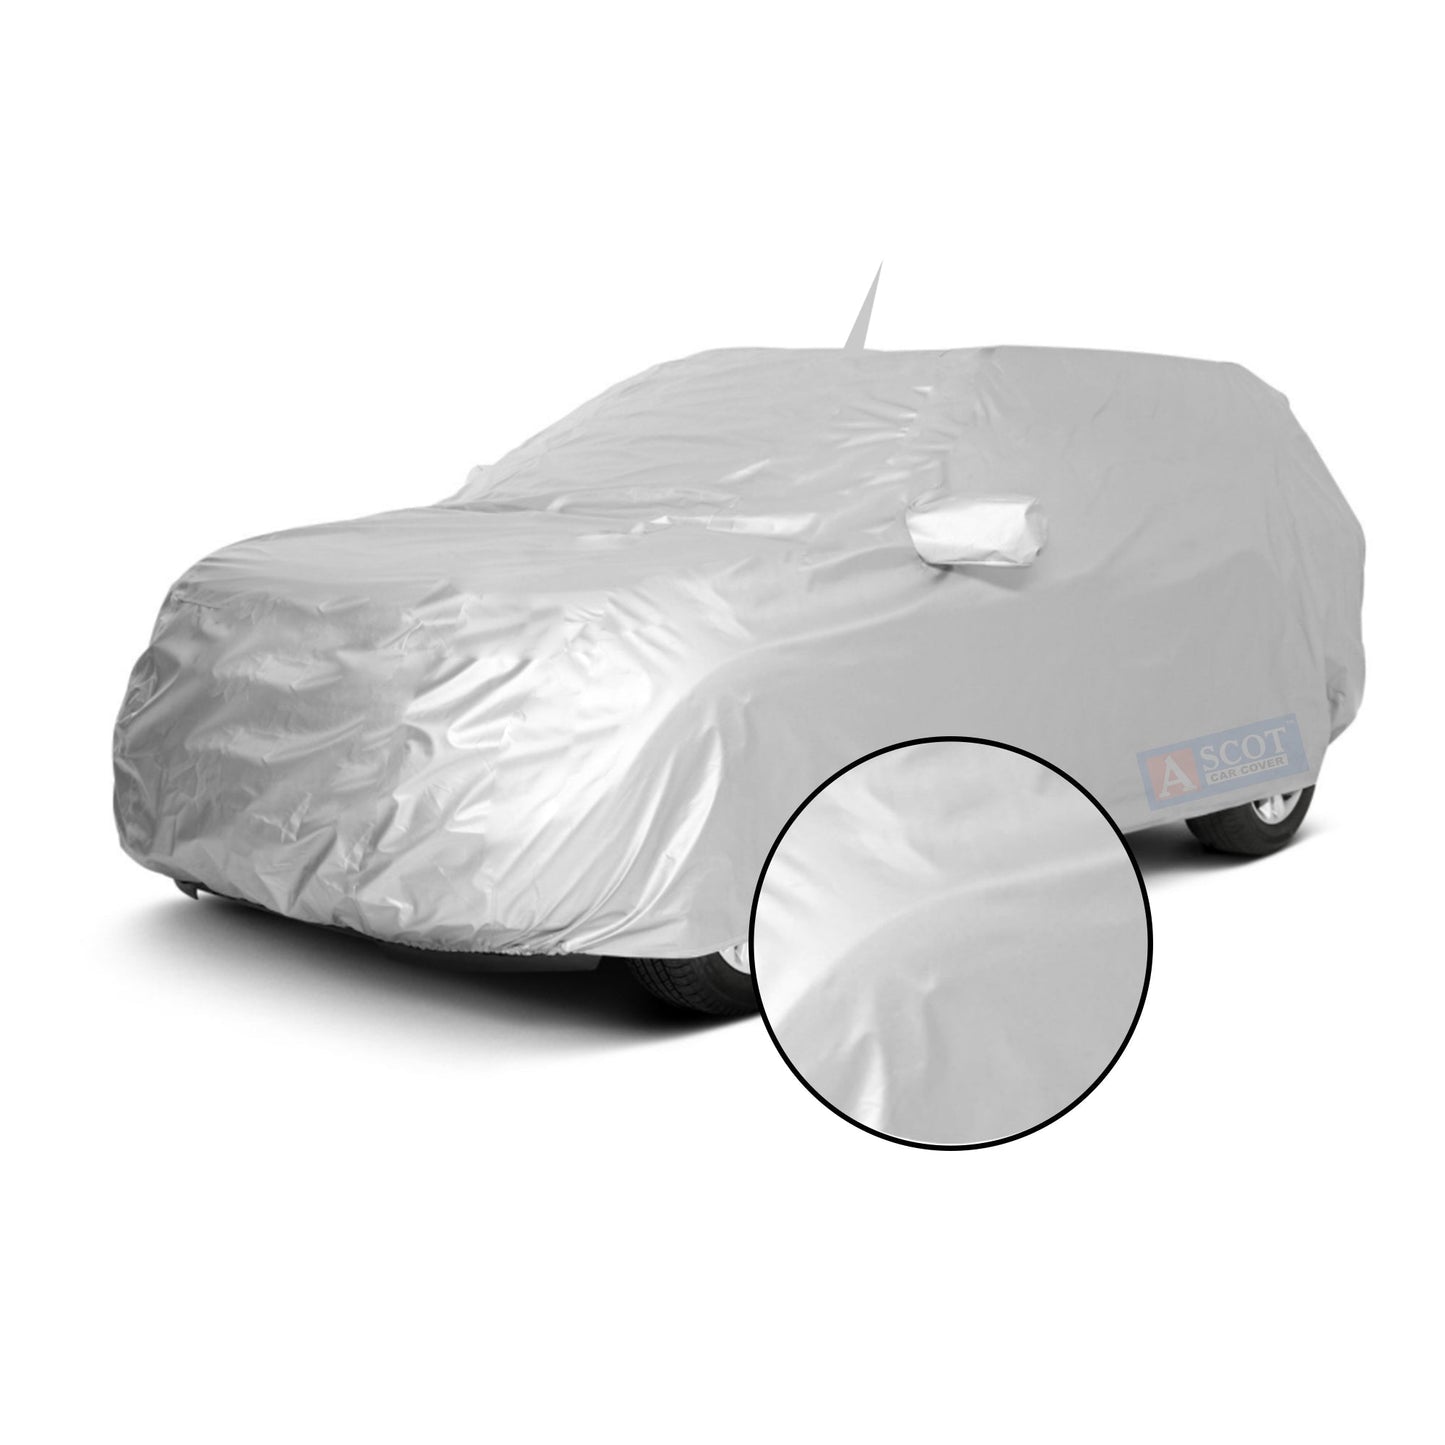 Ascot Honda City 4th Generation 2014-2024 Model Car Body Cover Dust Proof, Trippel Stitched